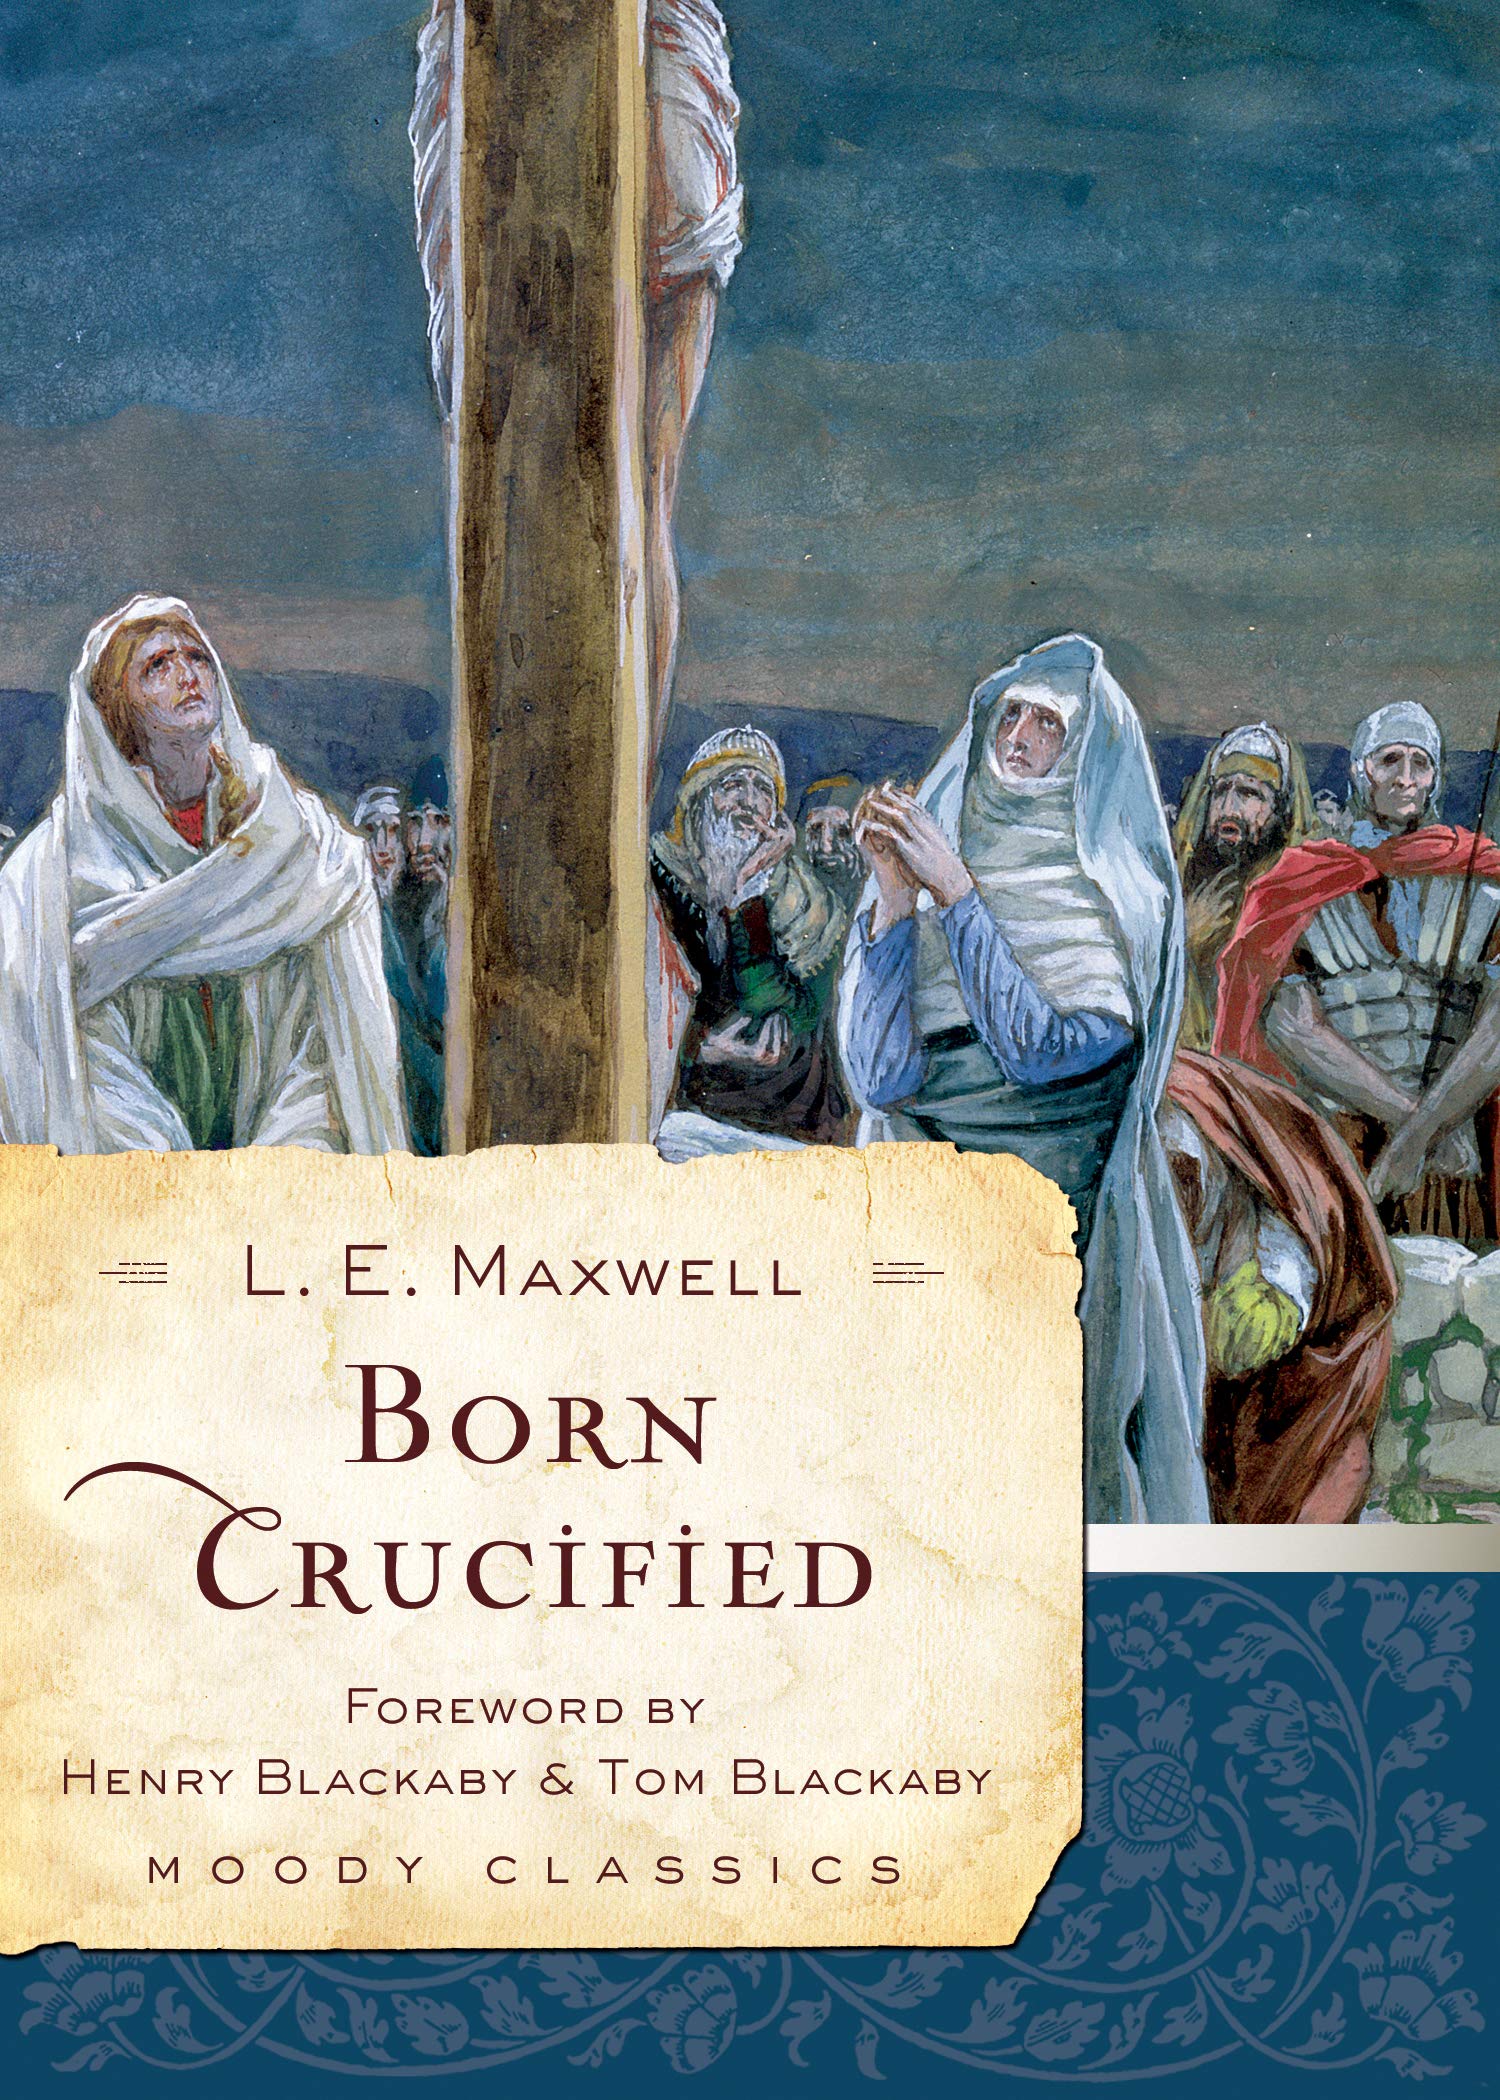 Born_Crucified_LE Maxwell_cover